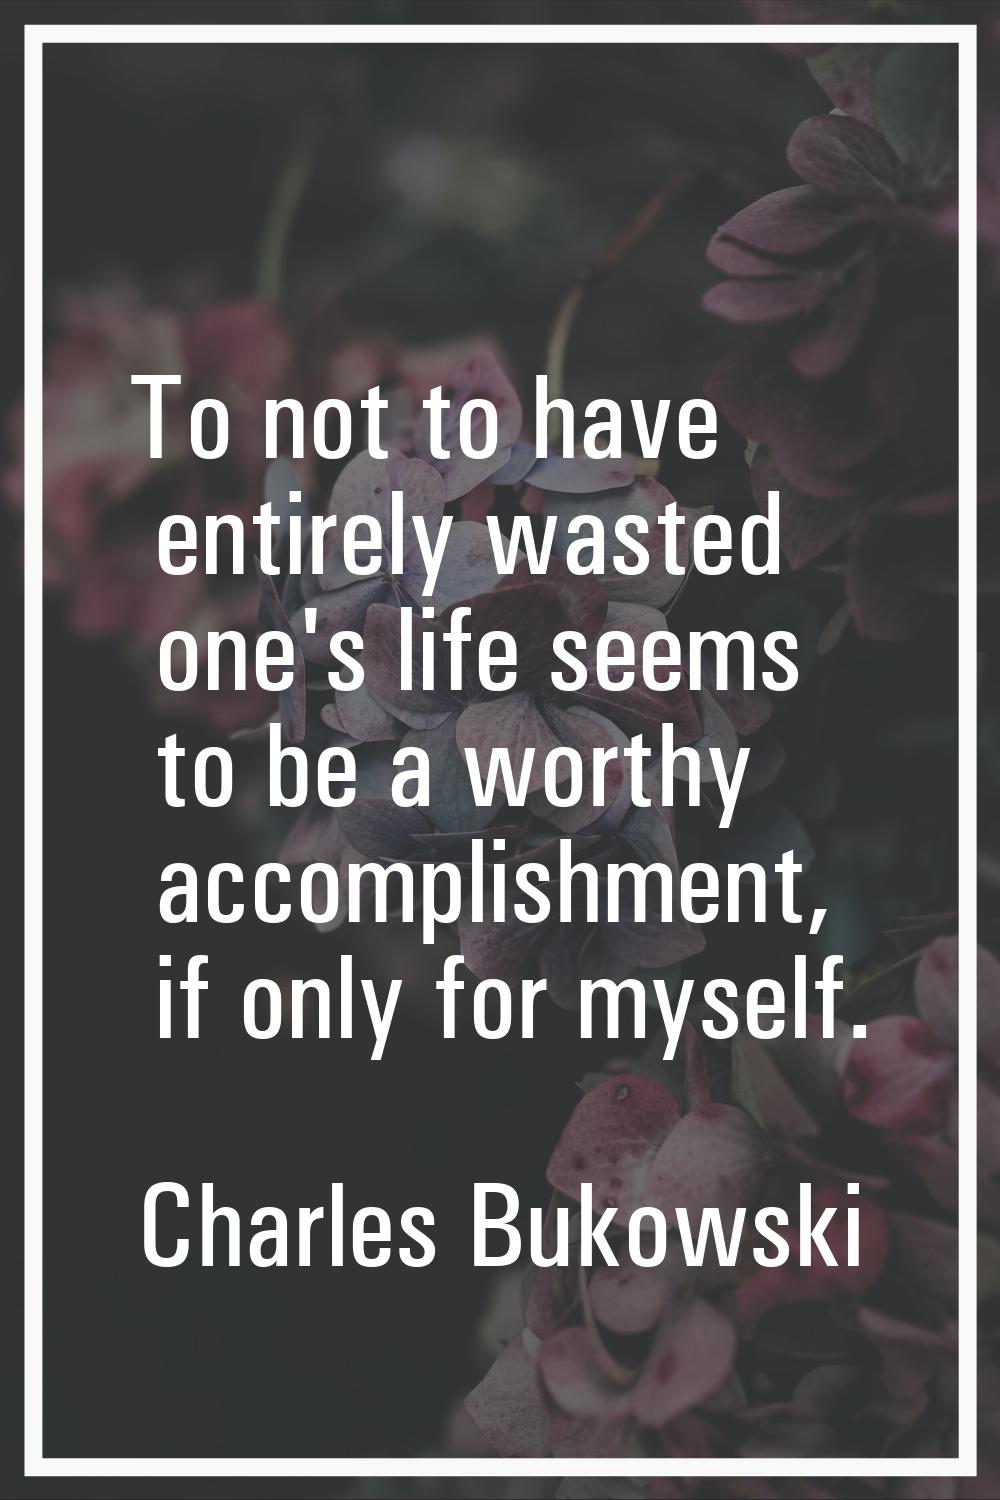 To not to have entirely wasted one's life seems to be a worthy accomplishment, if only for myself.